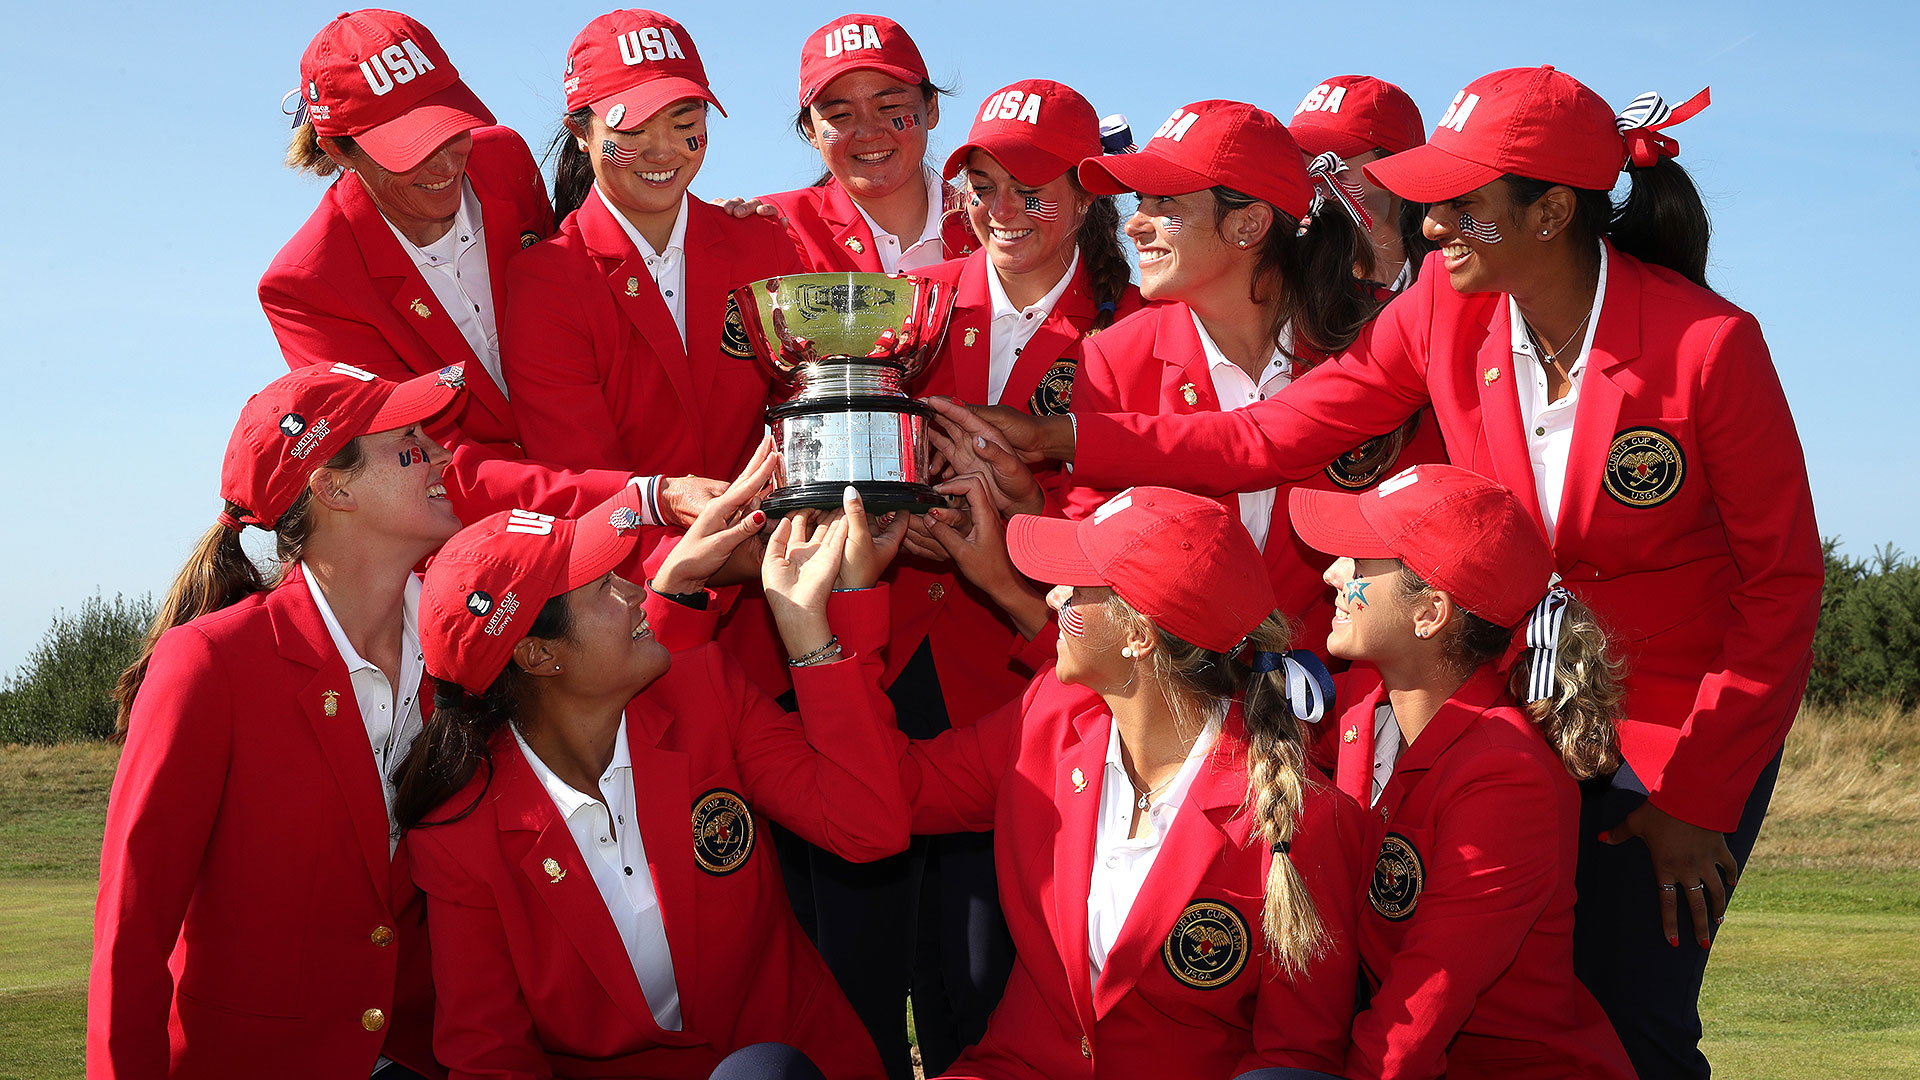 U.S. dominates GB&I in singles, wins Curtis Cup in Wales